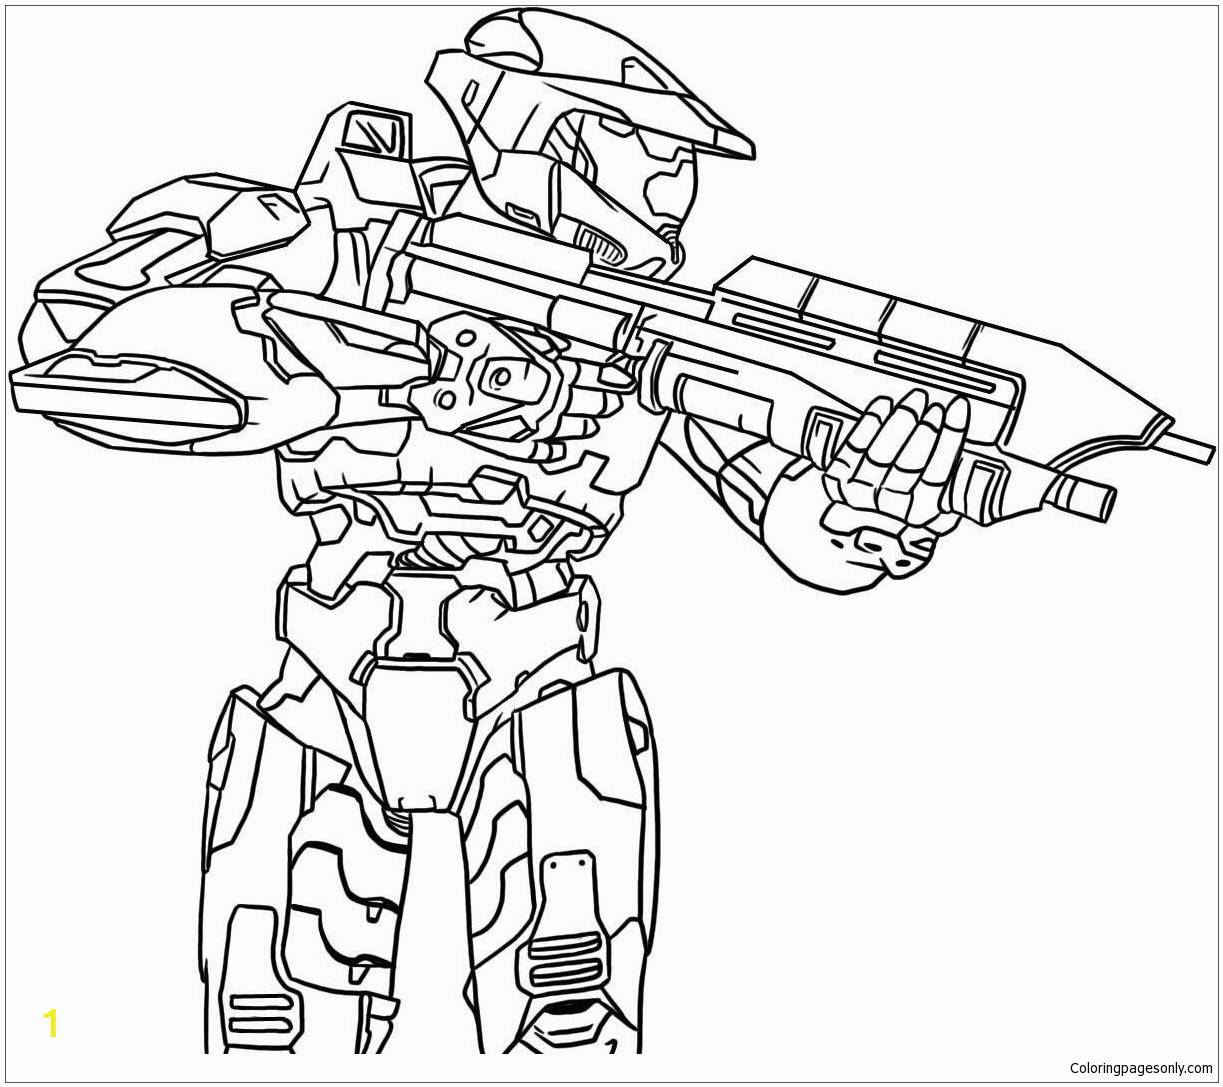 Halo Coloring Pages to Print 100 Pages the Knight Halo Coloring Pages Cartoons Coloring Pages